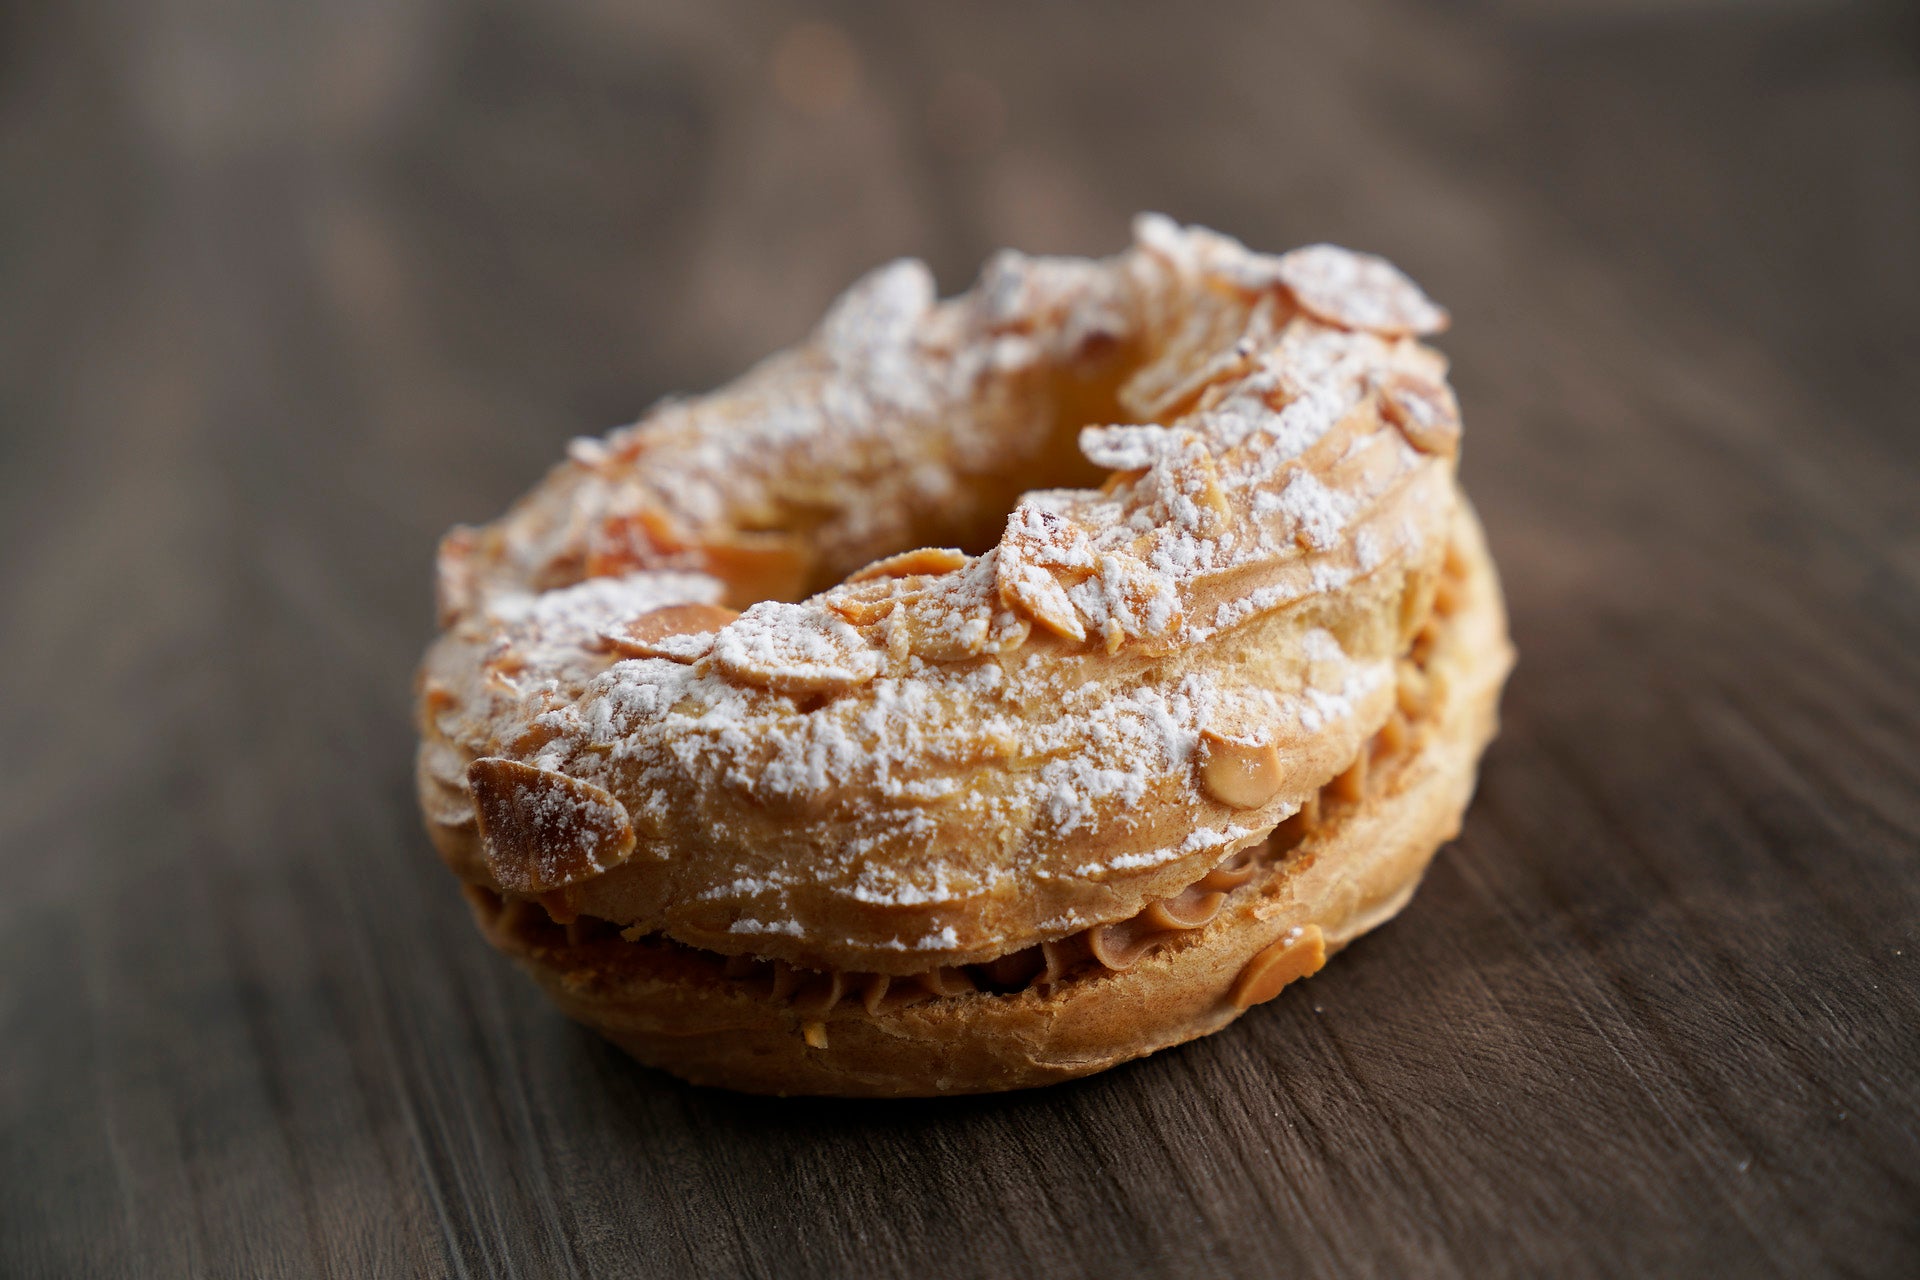 Round choux in the form of a wheel topped with almond slices, filled with hazelnut mousseline and crushed caramelized hazelnuts.